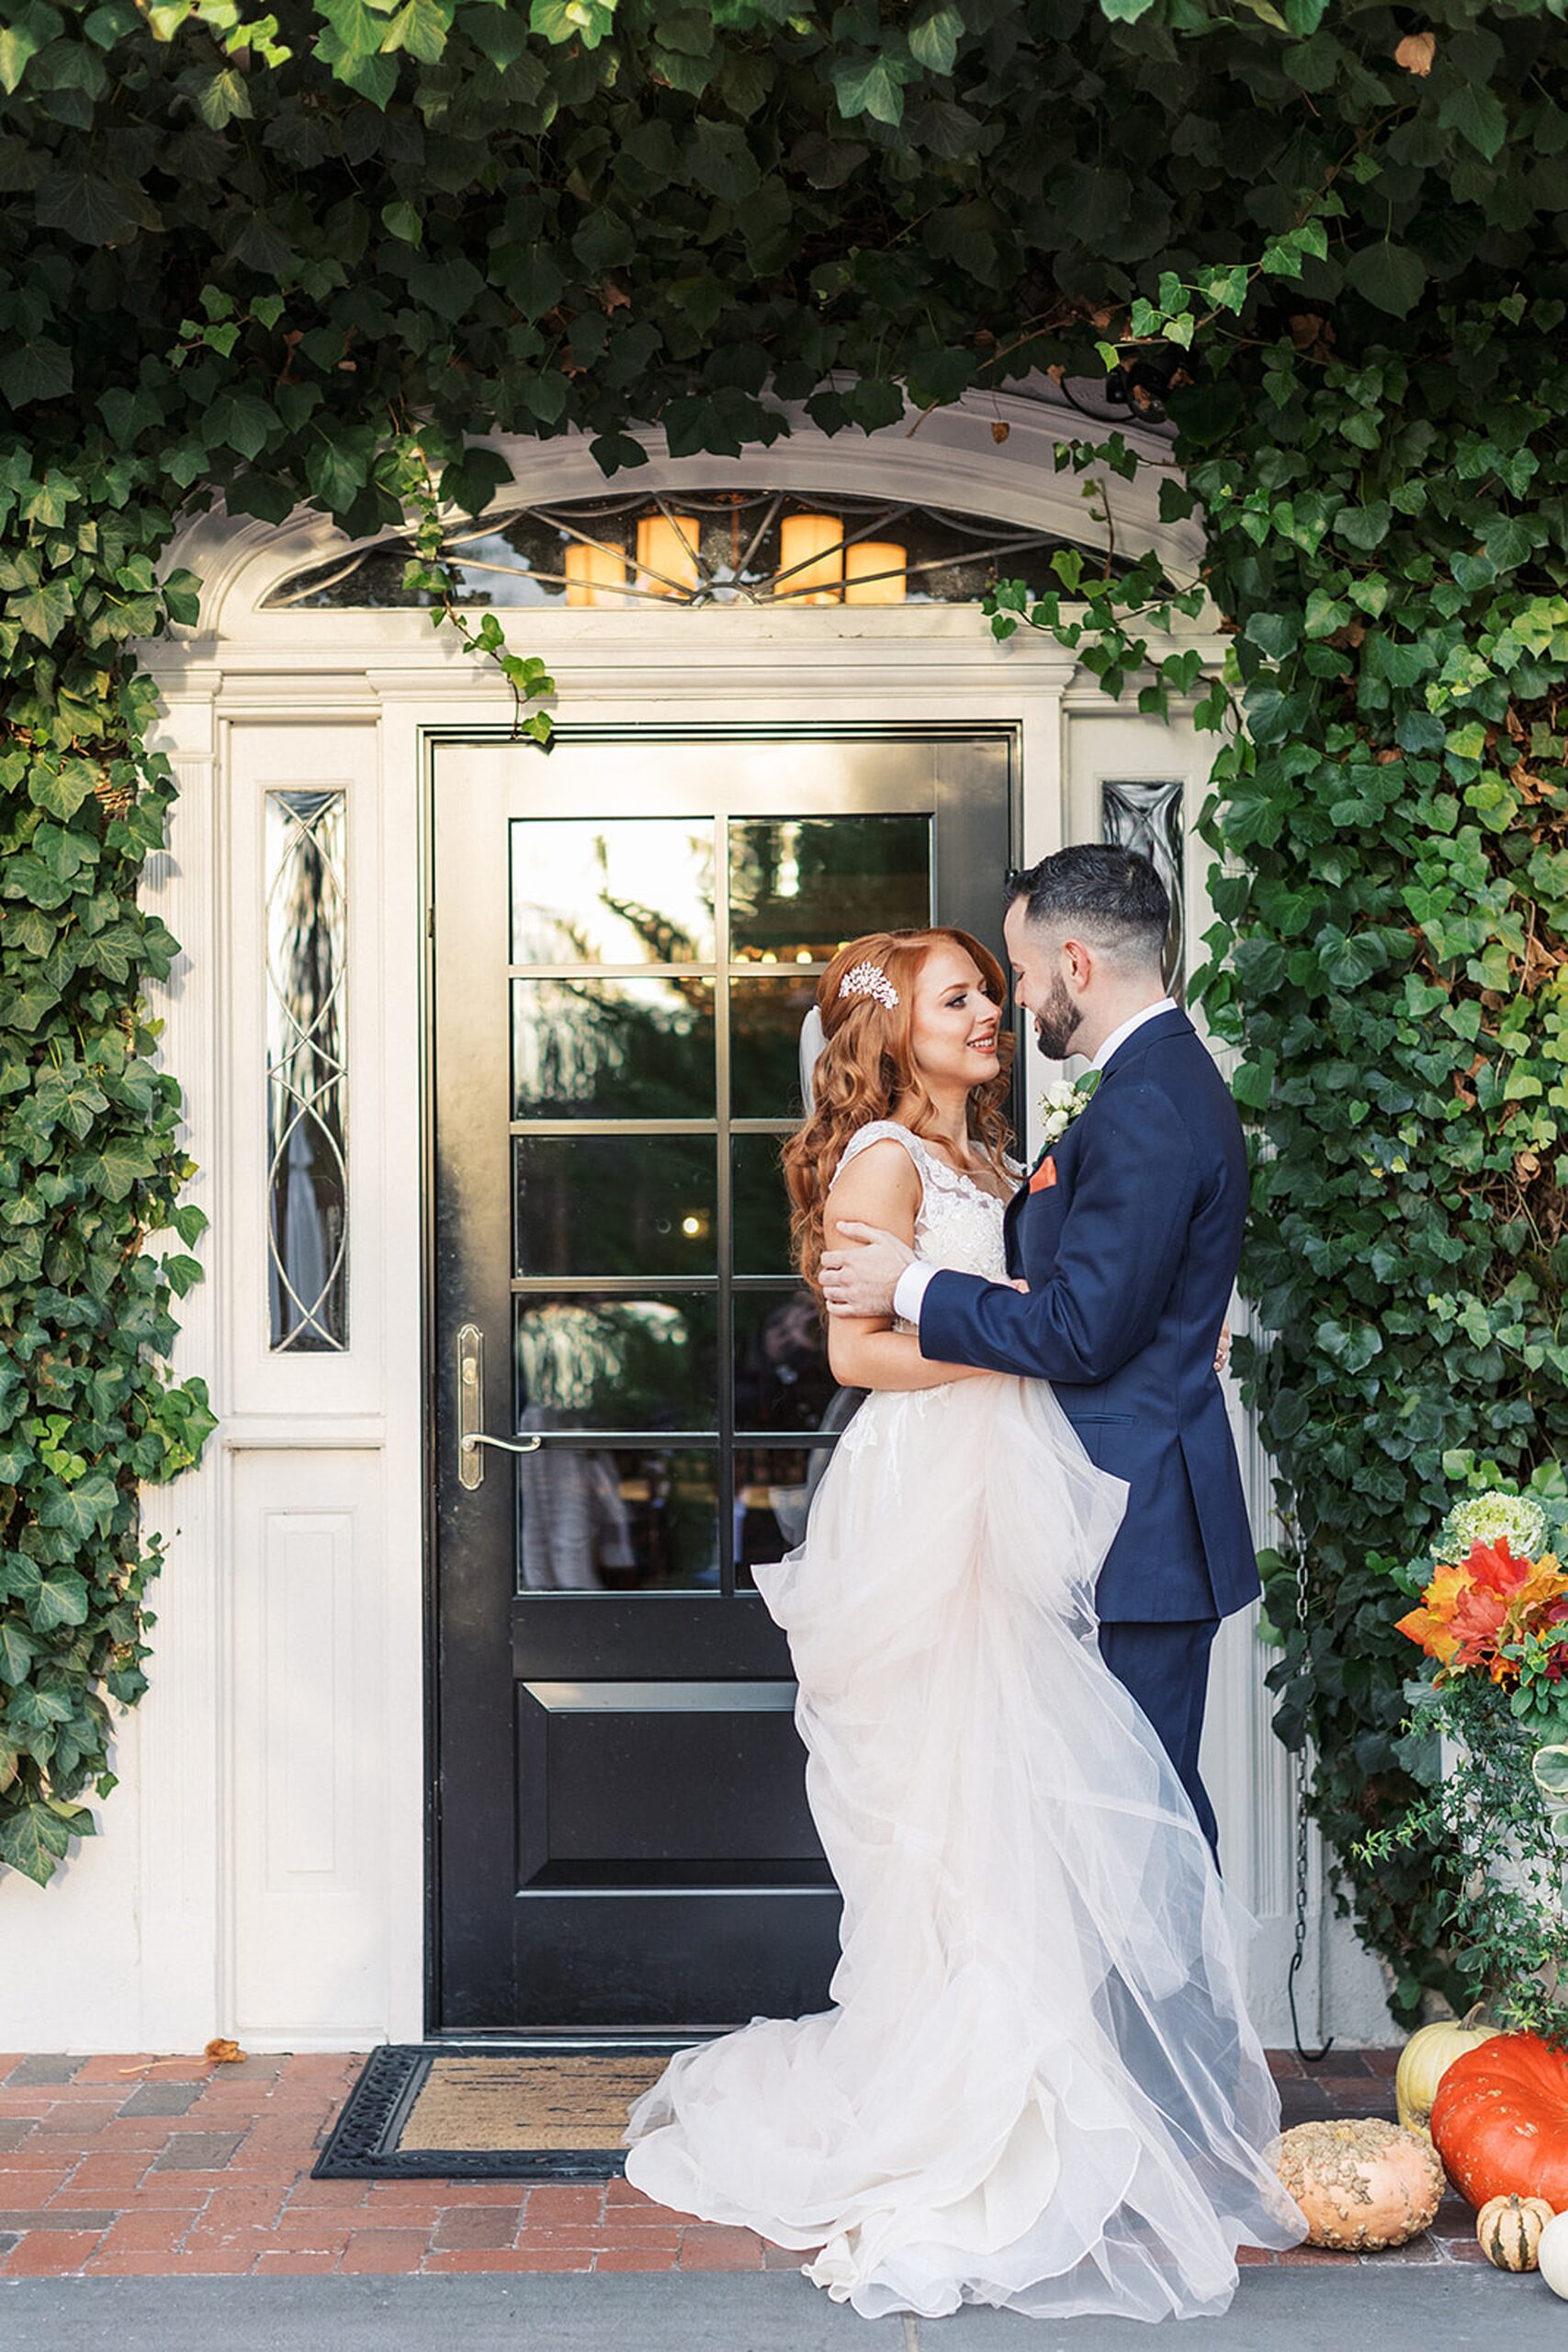 Newlyweds embrace for a kiss under an ivy covered front door entrance at a David's country inn wedding